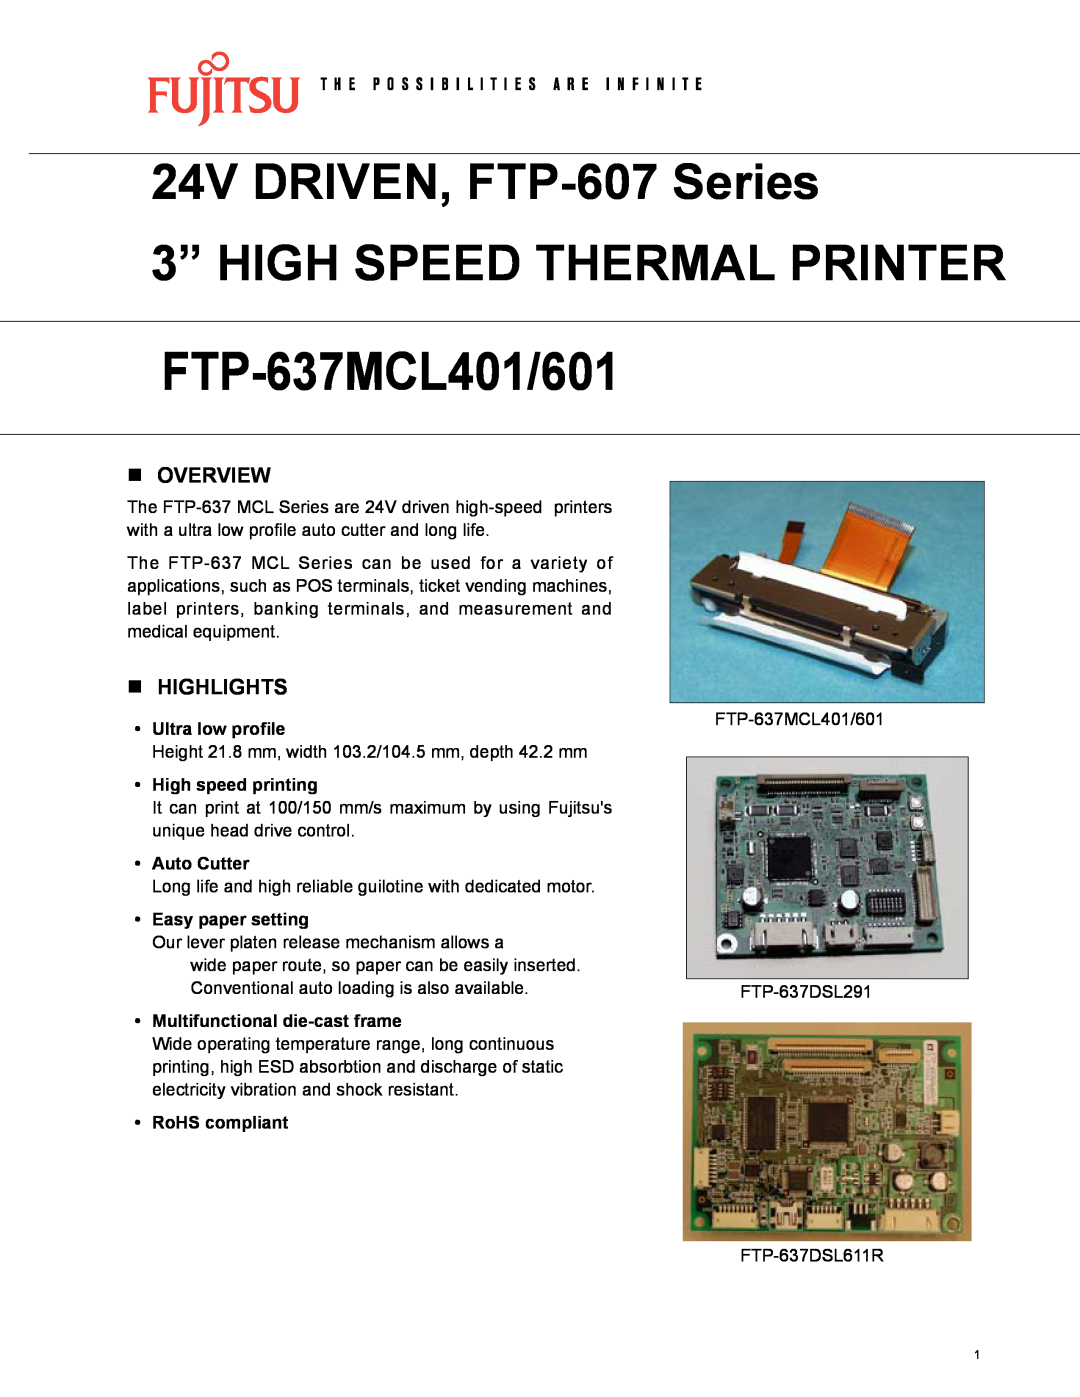 Fujitsu FTP-637MCL401 manual n Overview, n HIGHLIGHTS, Ultra low profile, High speed printing, Auto Cutter, RoHS compliant 